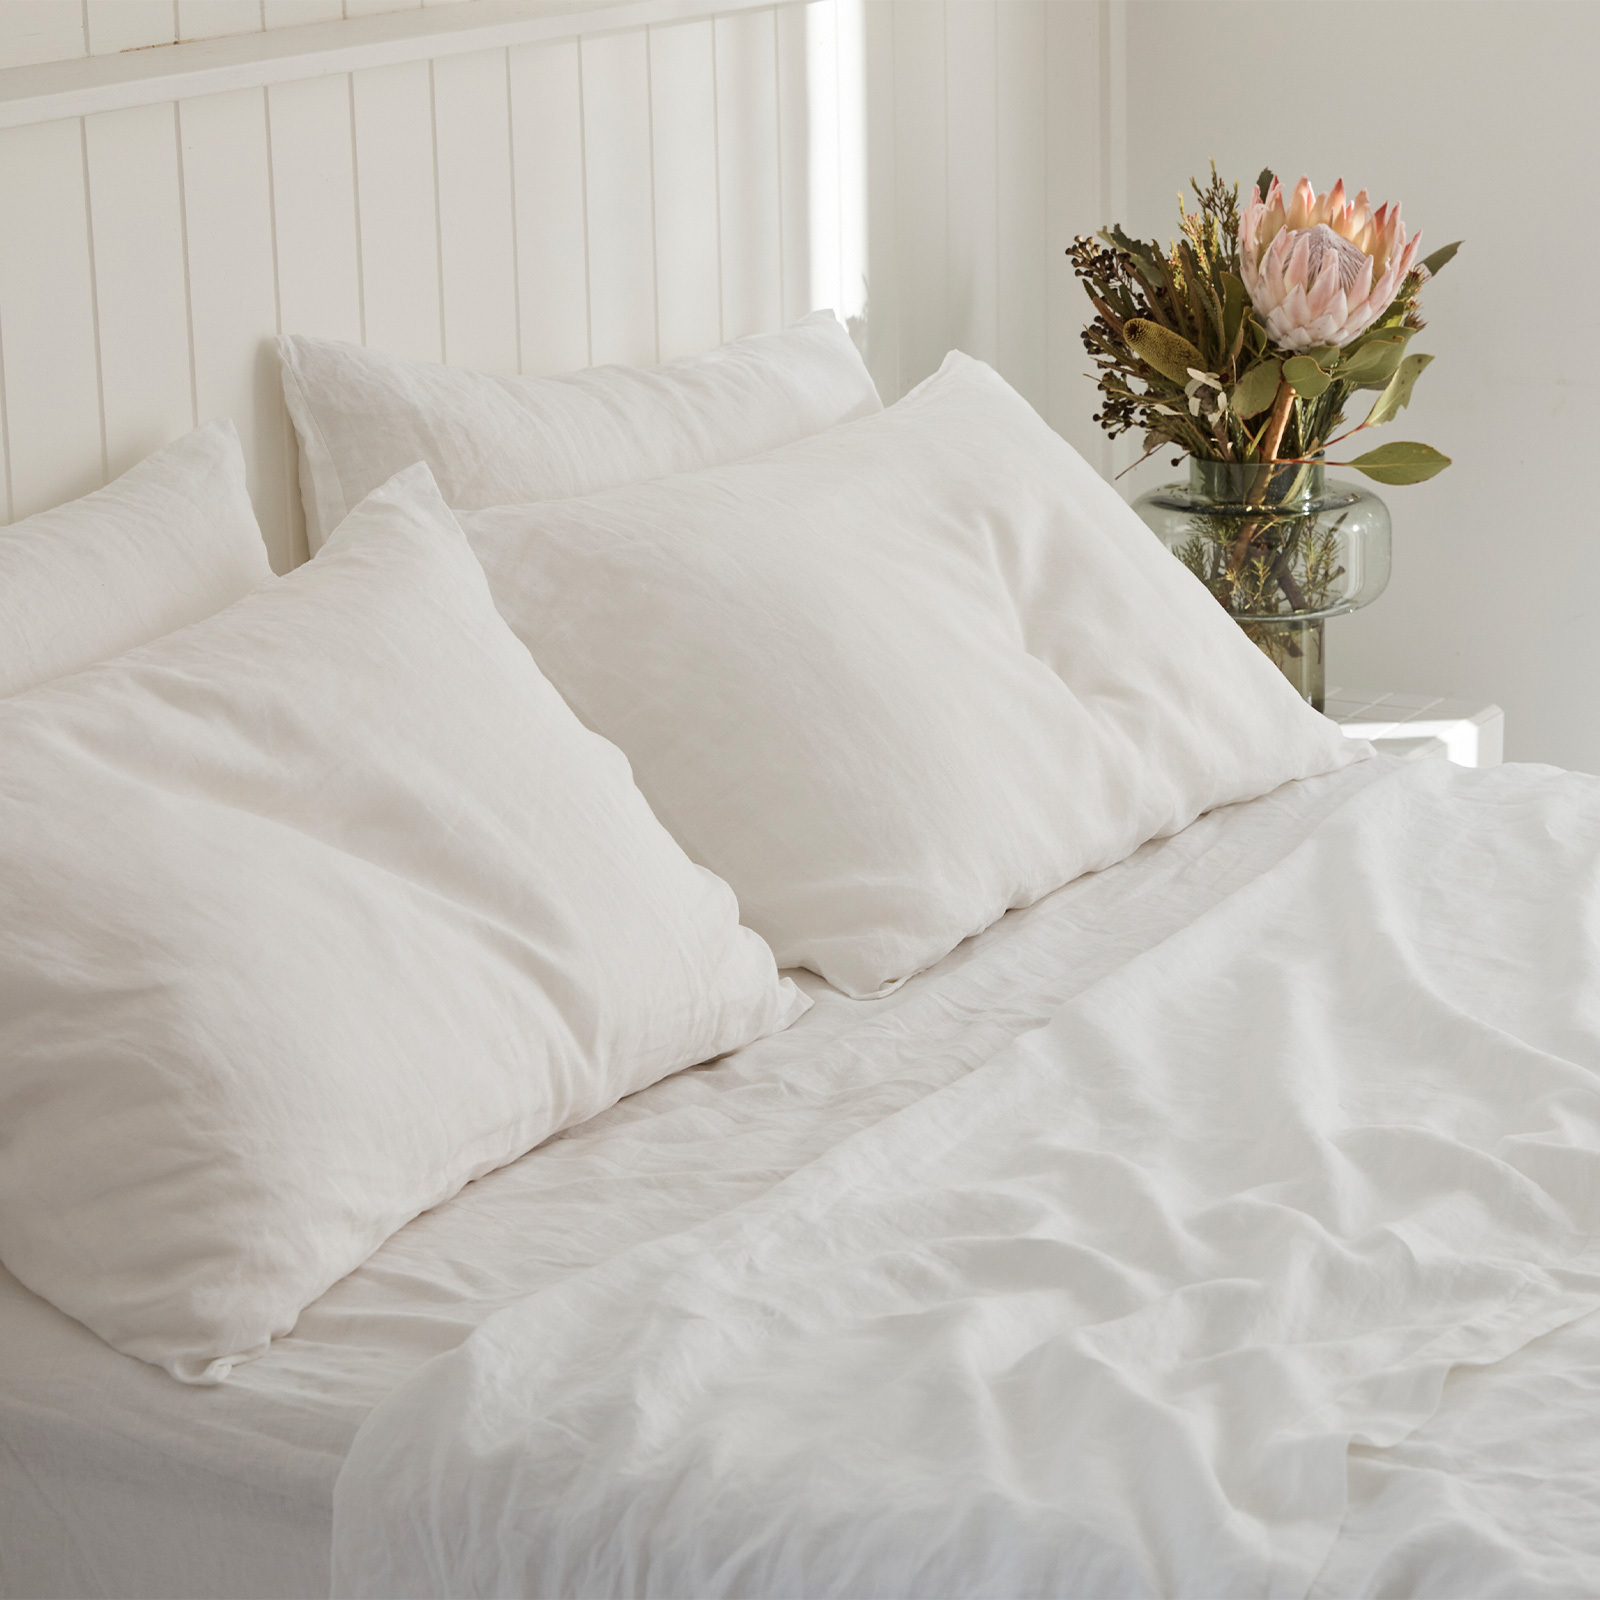 100% pure French linen sheet set in White